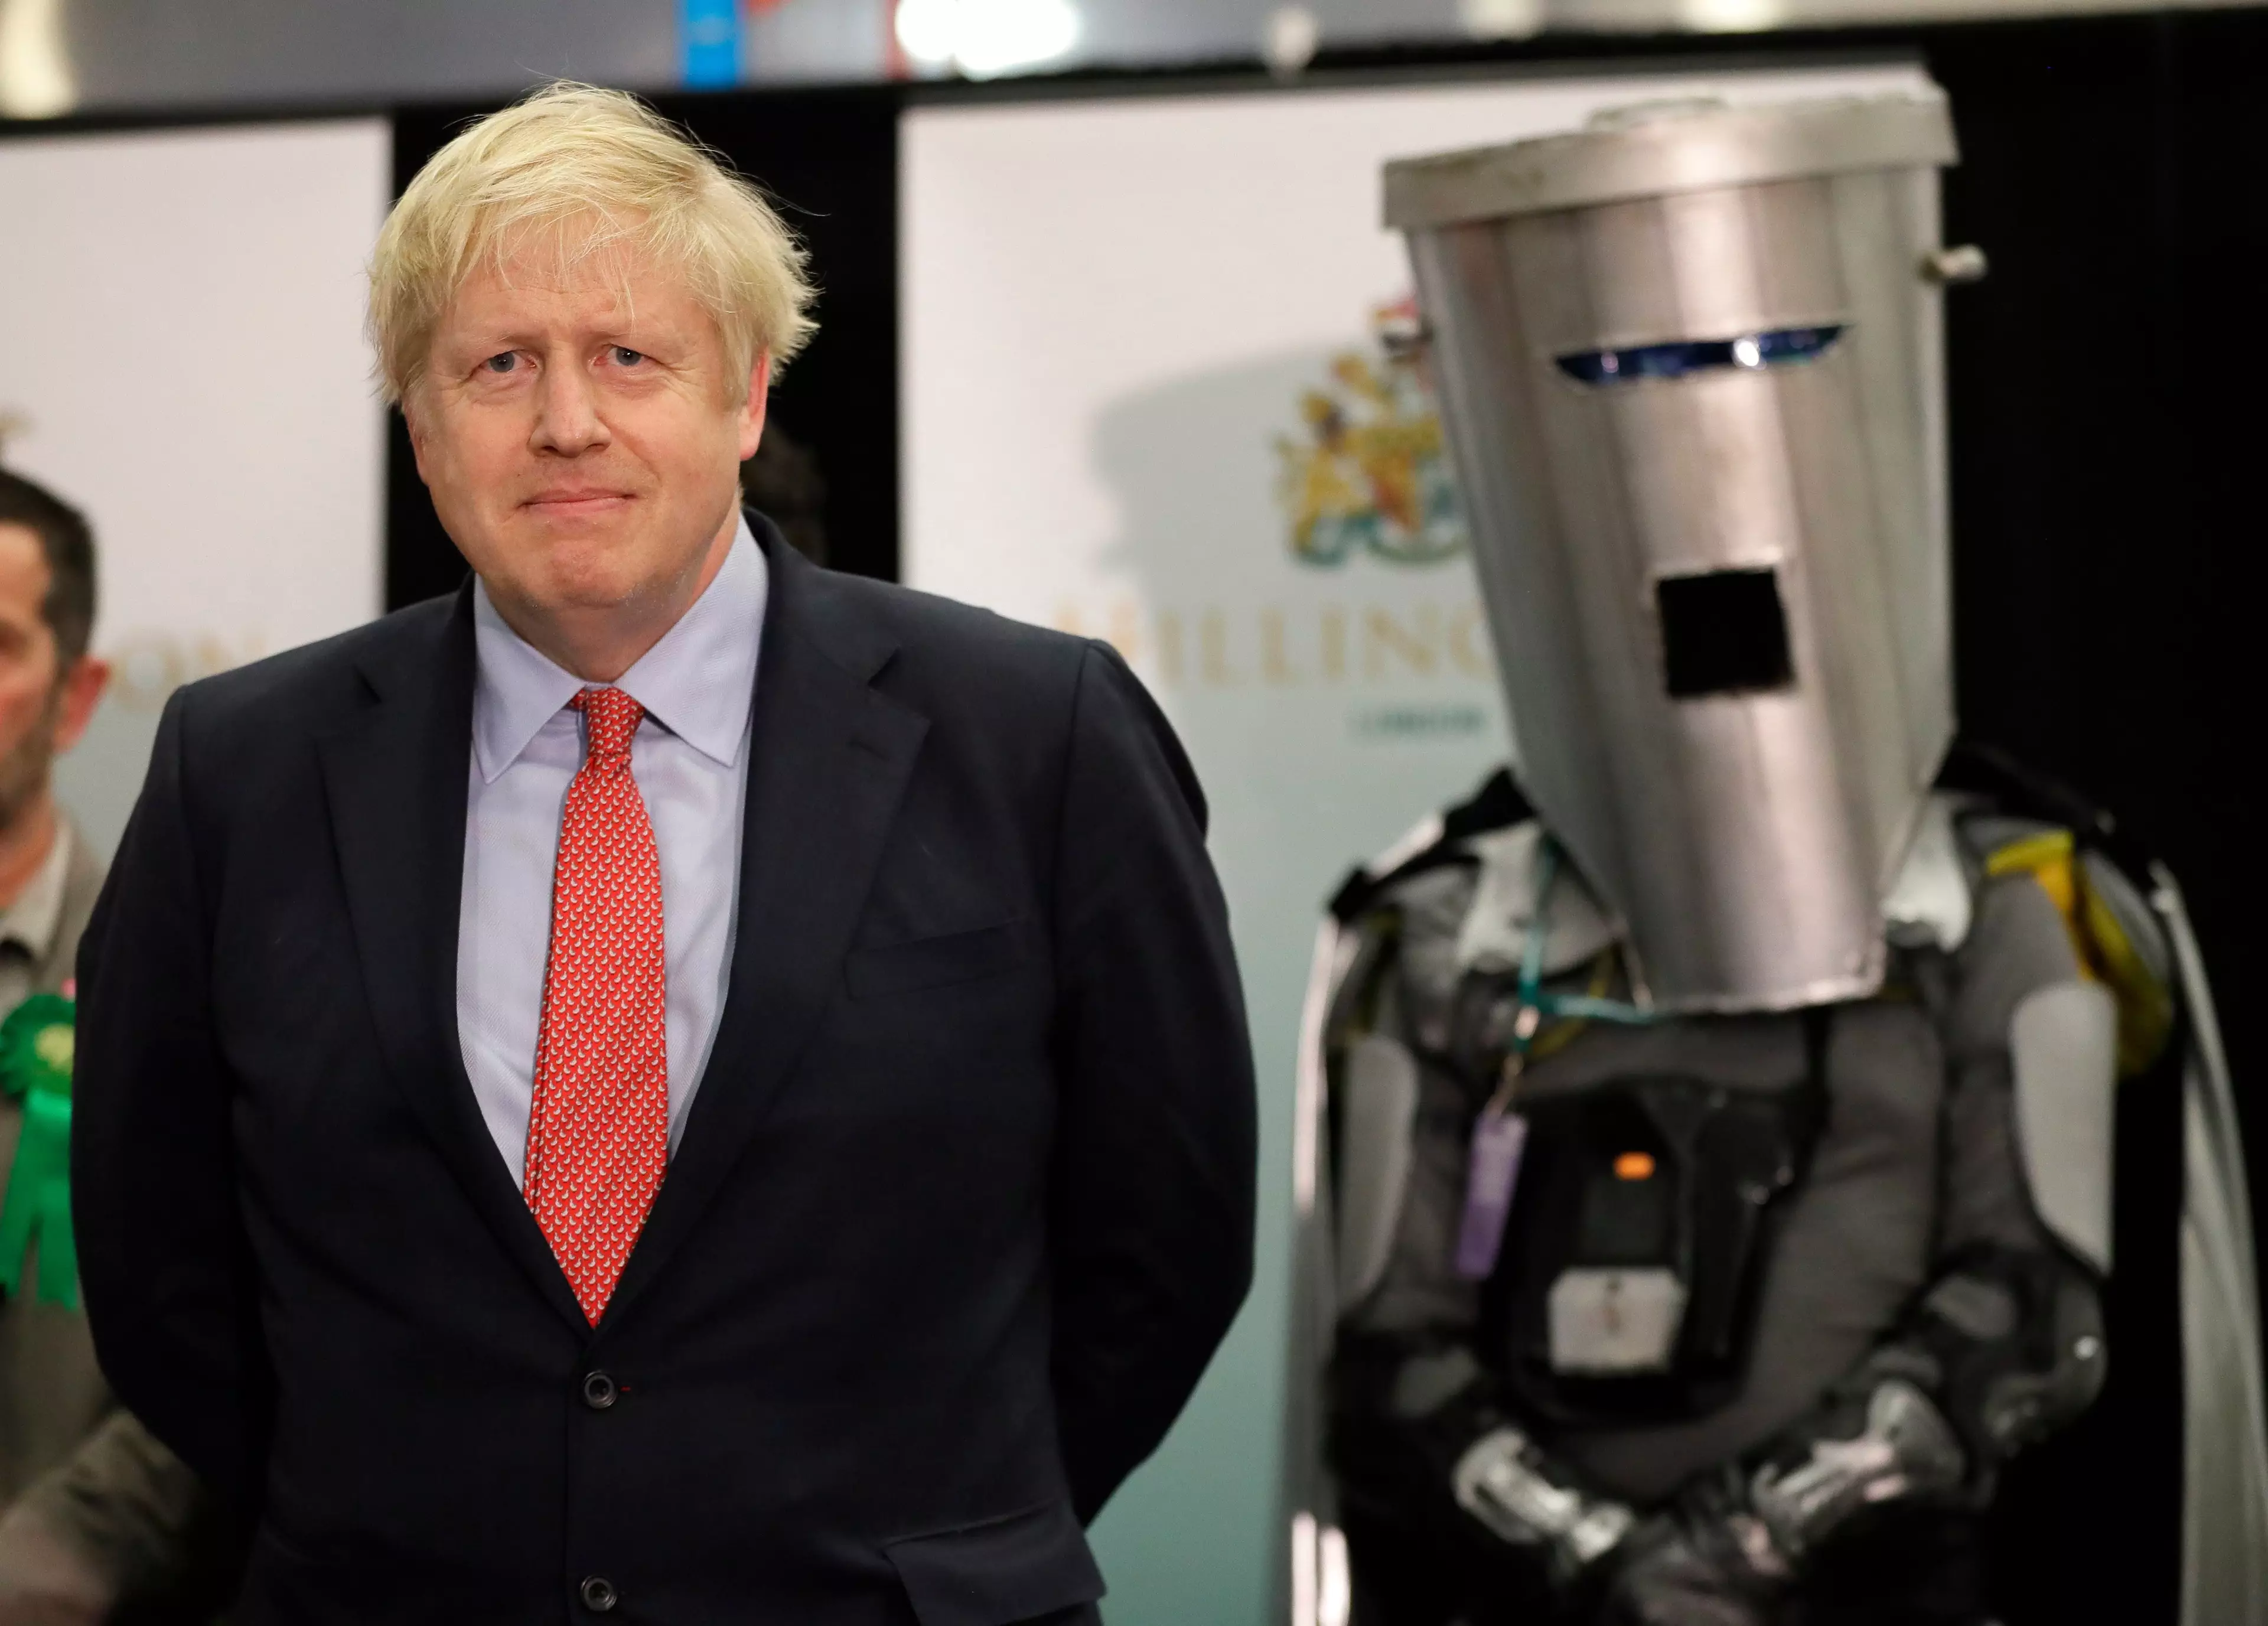 Count Binface stood against Boris Johnson in the 2019 general election.